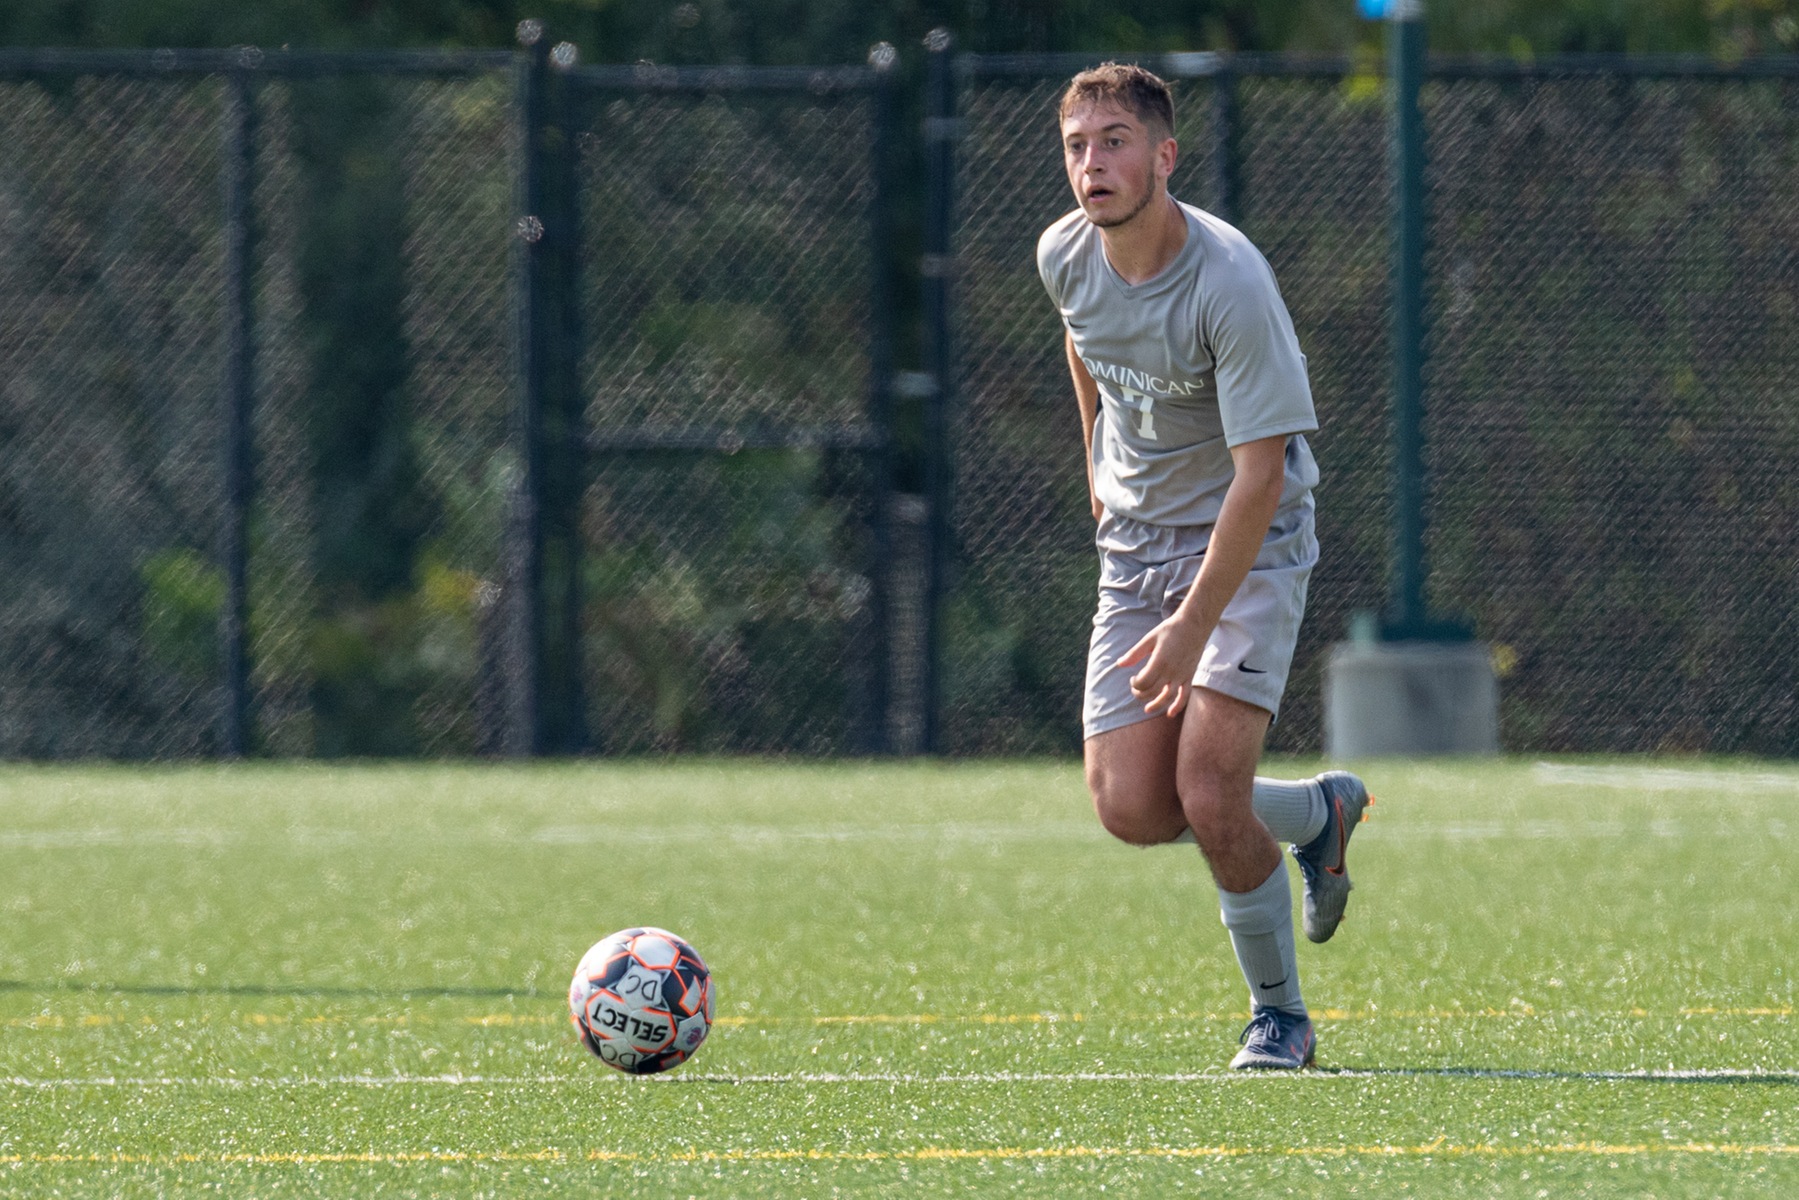 MEN'S SOCCER DROPS CONFERENCE GAME TO GOLDEY-BEACOM COLLEGE